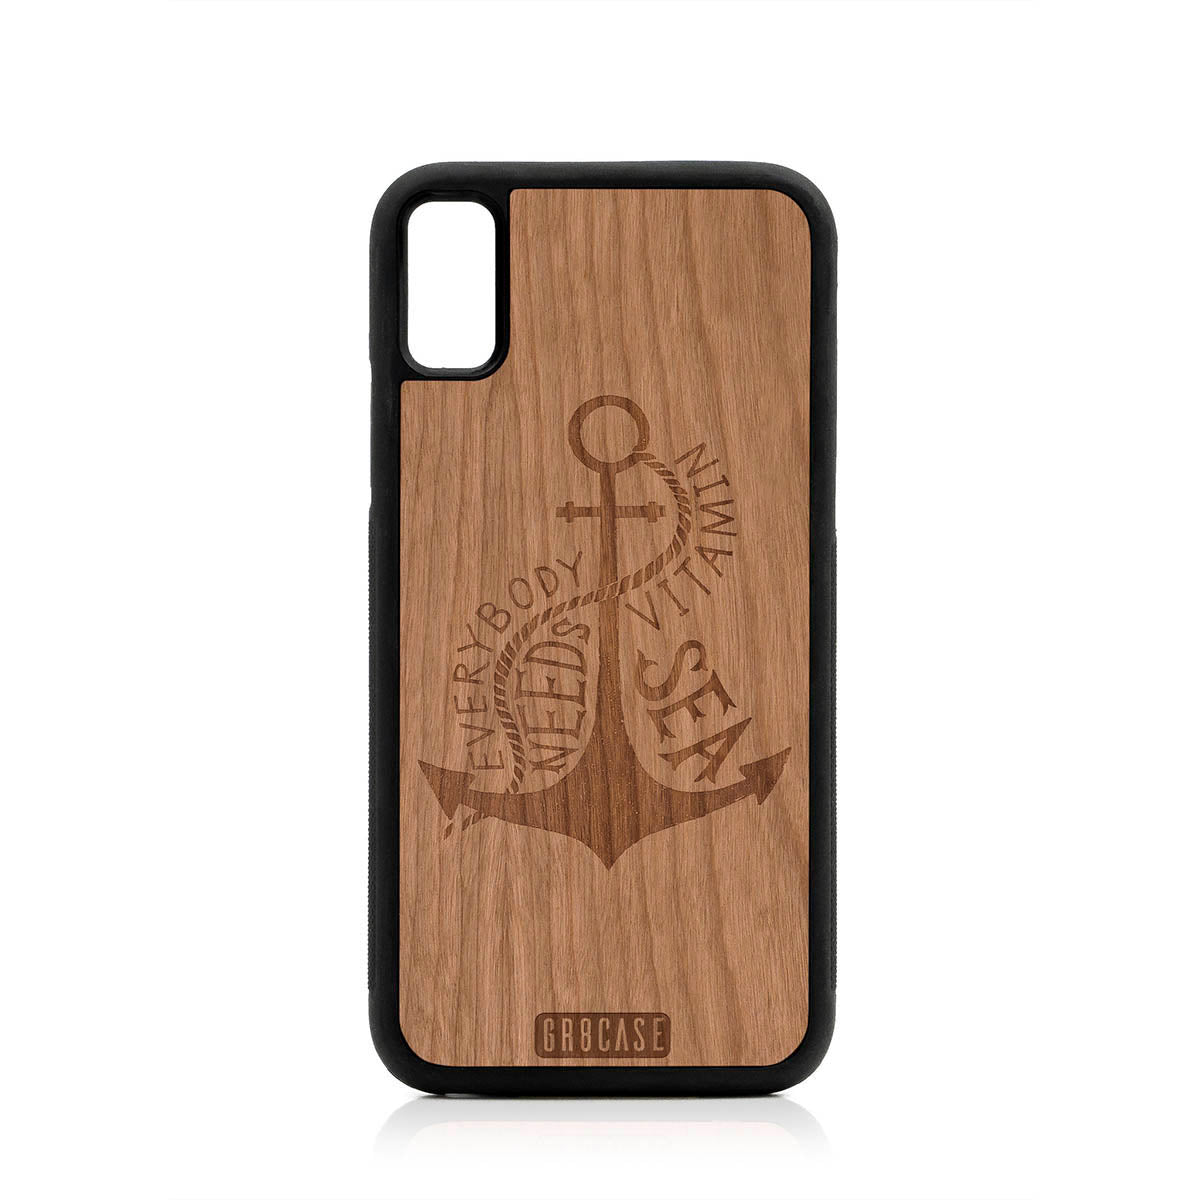 Everybody Needs Vitamin Sea (Anchor) Design Wood Case For iPhone XS Max by GR8CASE